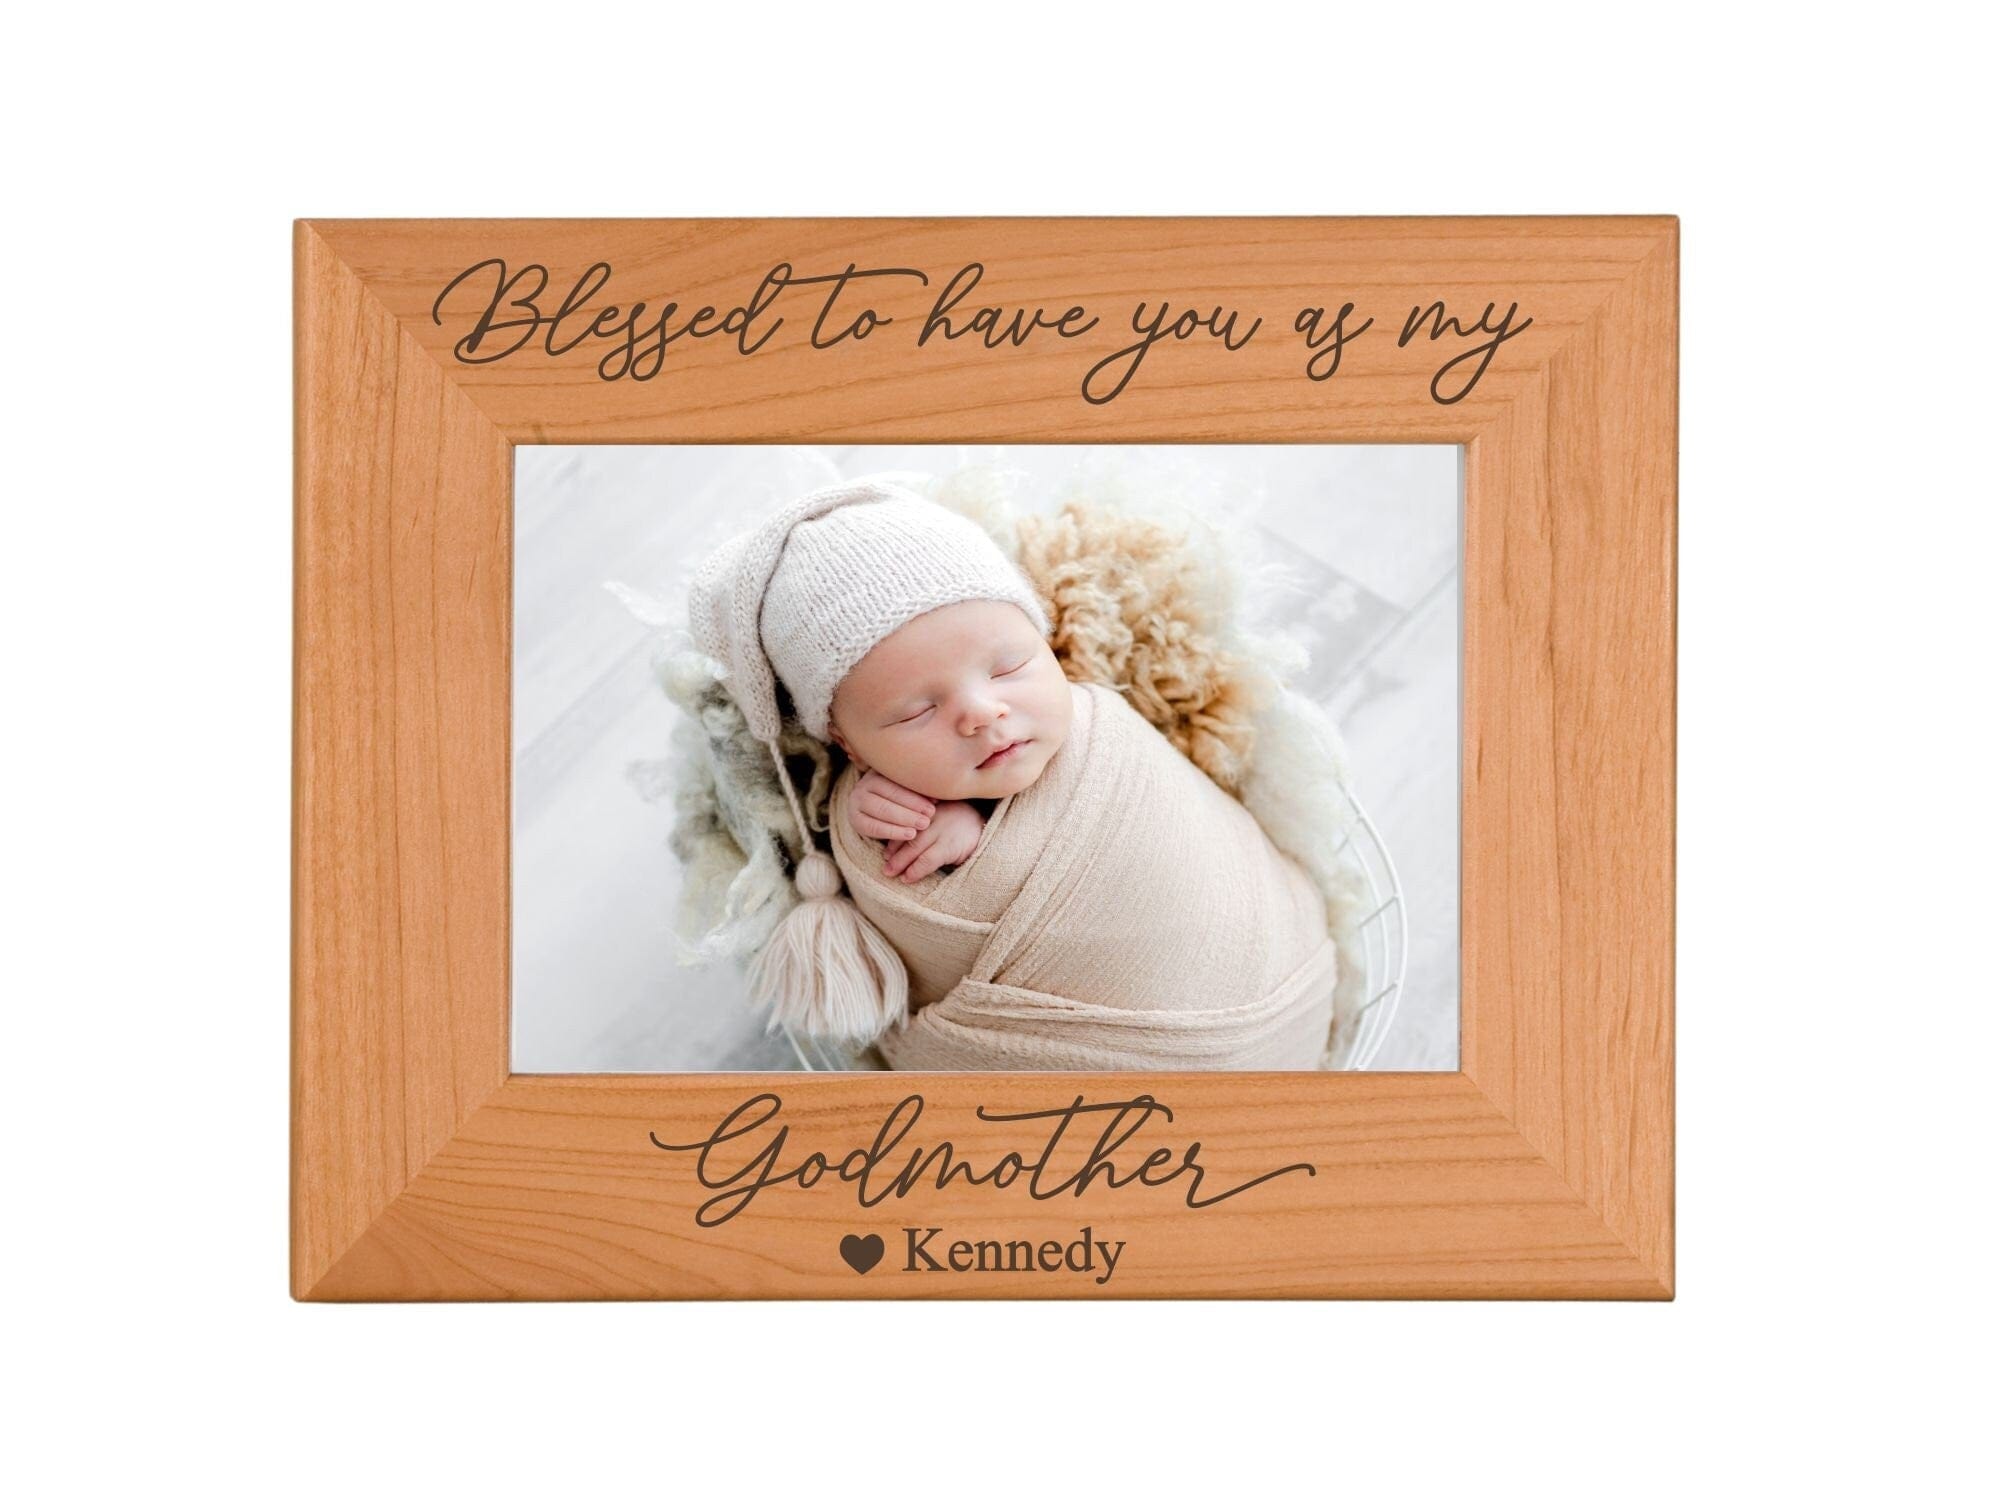 Run Wild Engraving PF 1 name Godmother Picture Frame Personalized